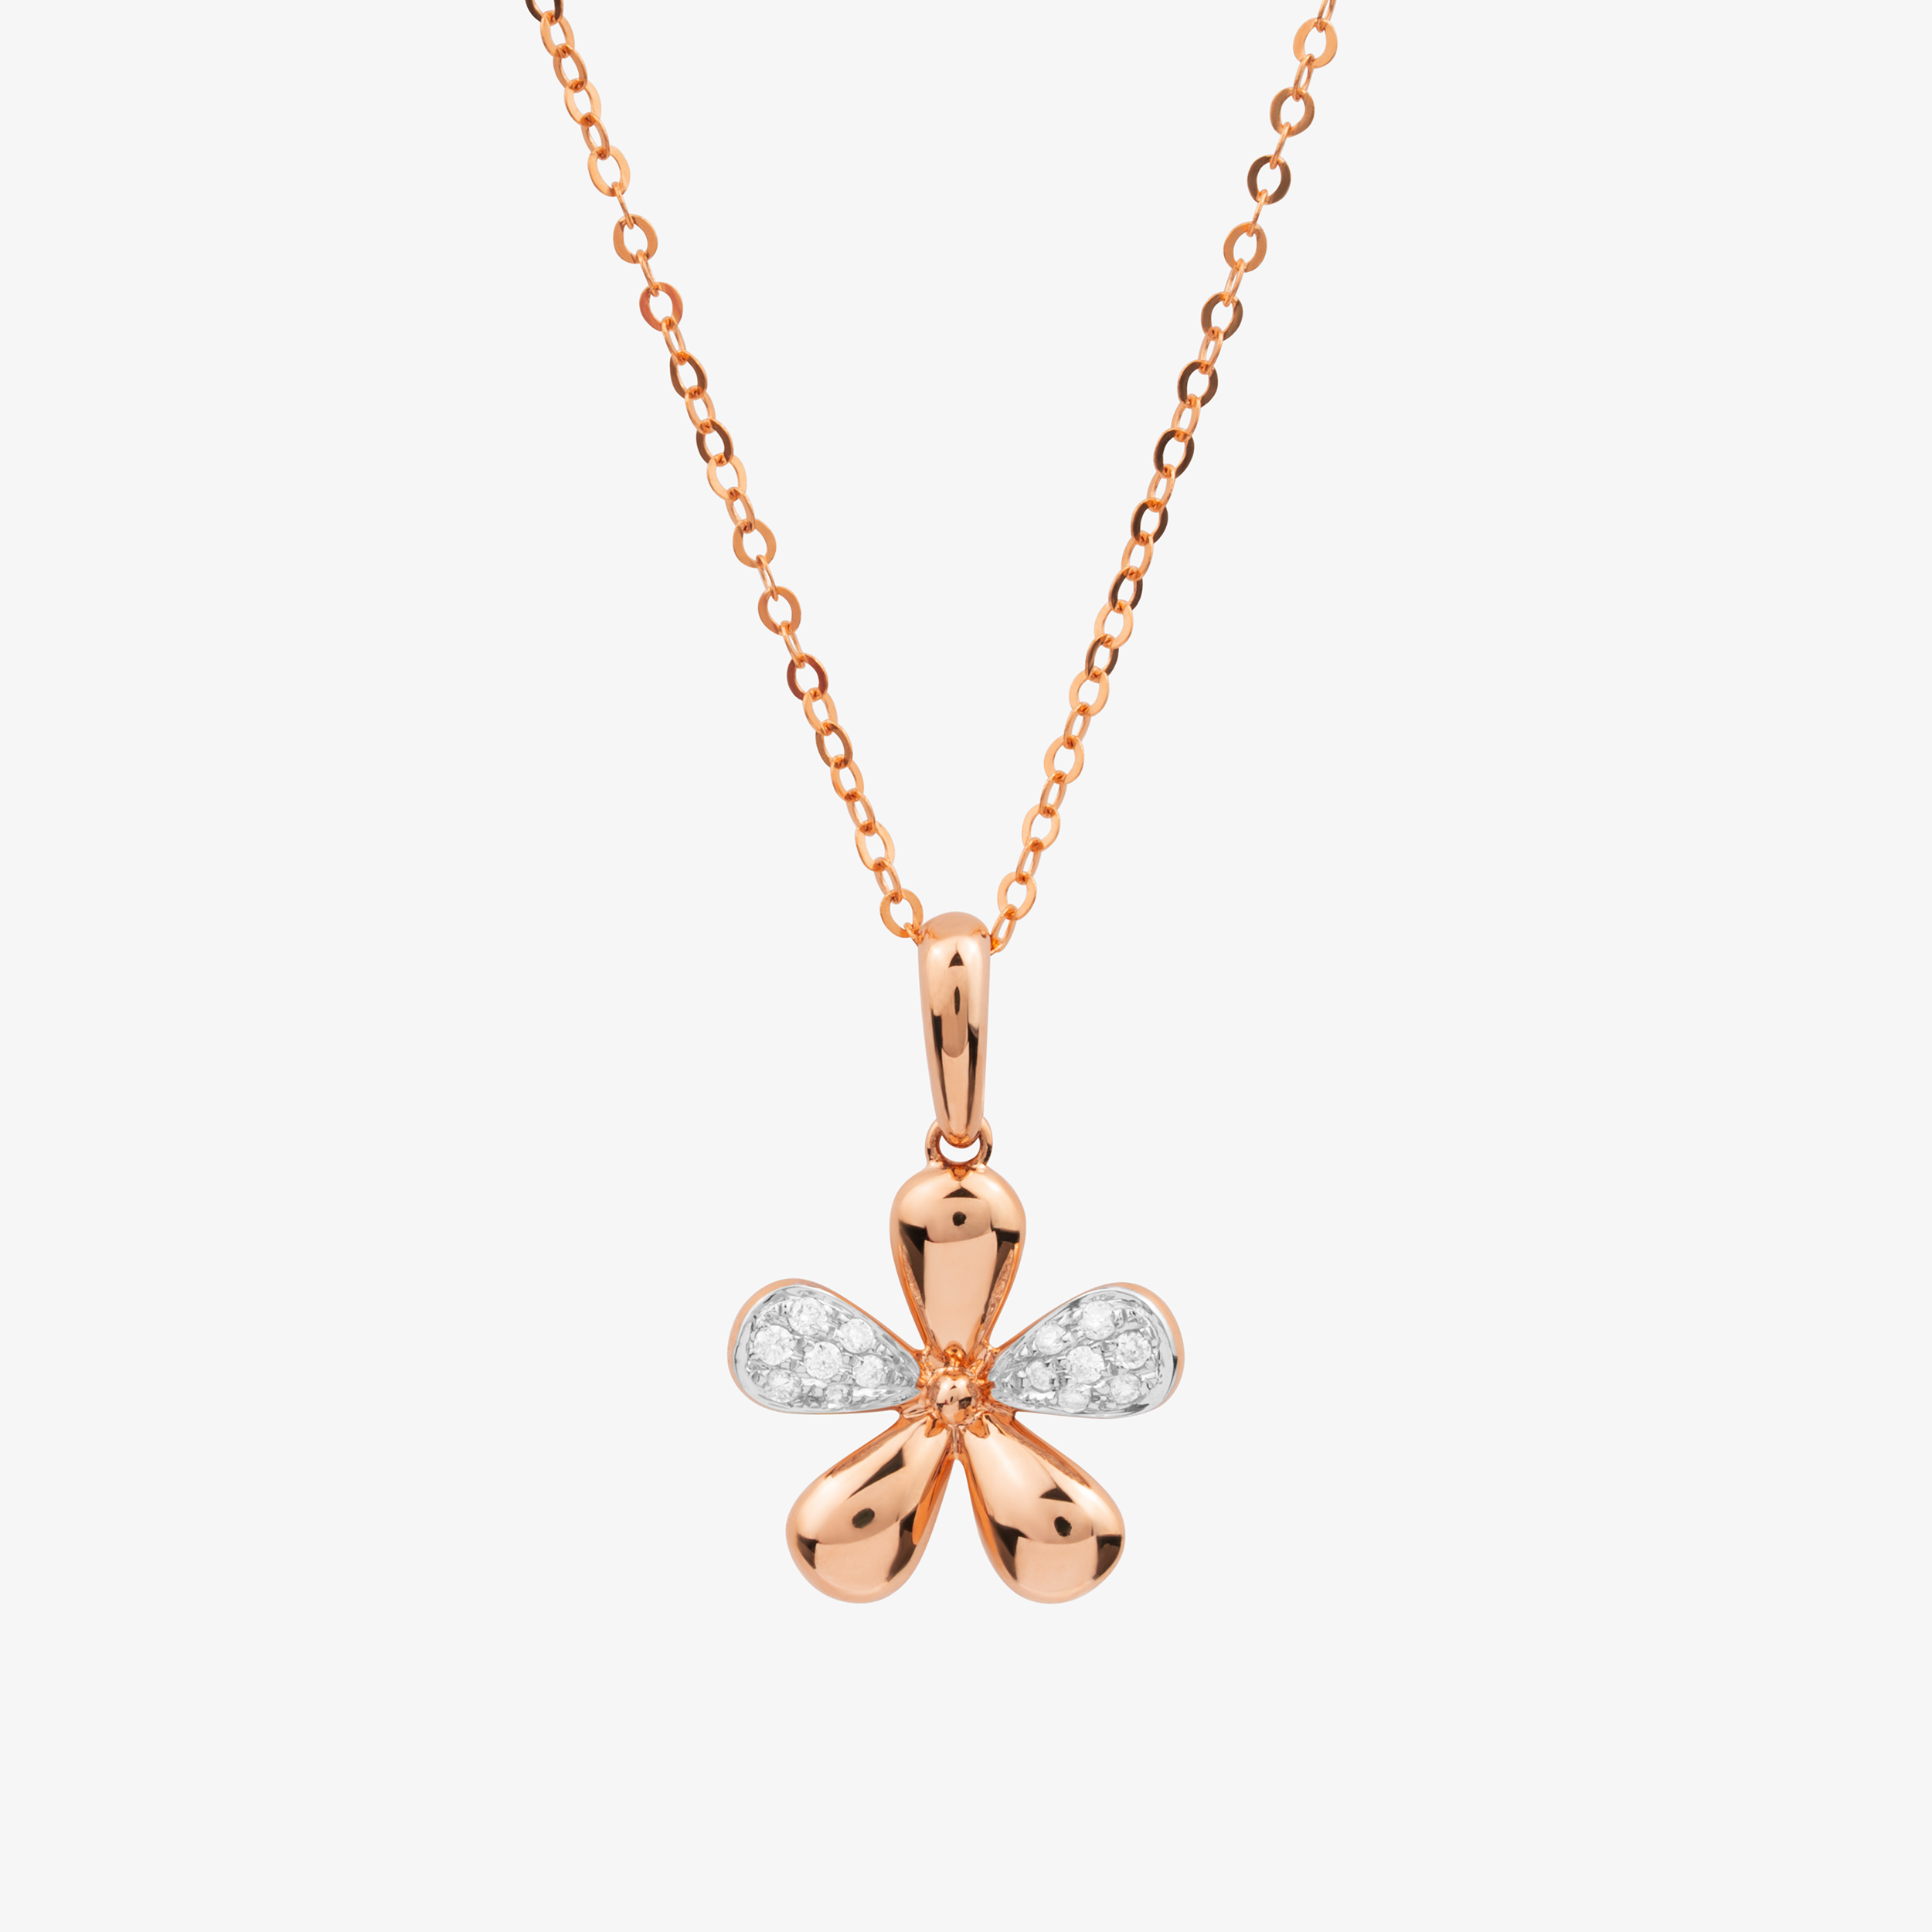 Clover Necklace In 18K Solid Rose Gold With Diamonds